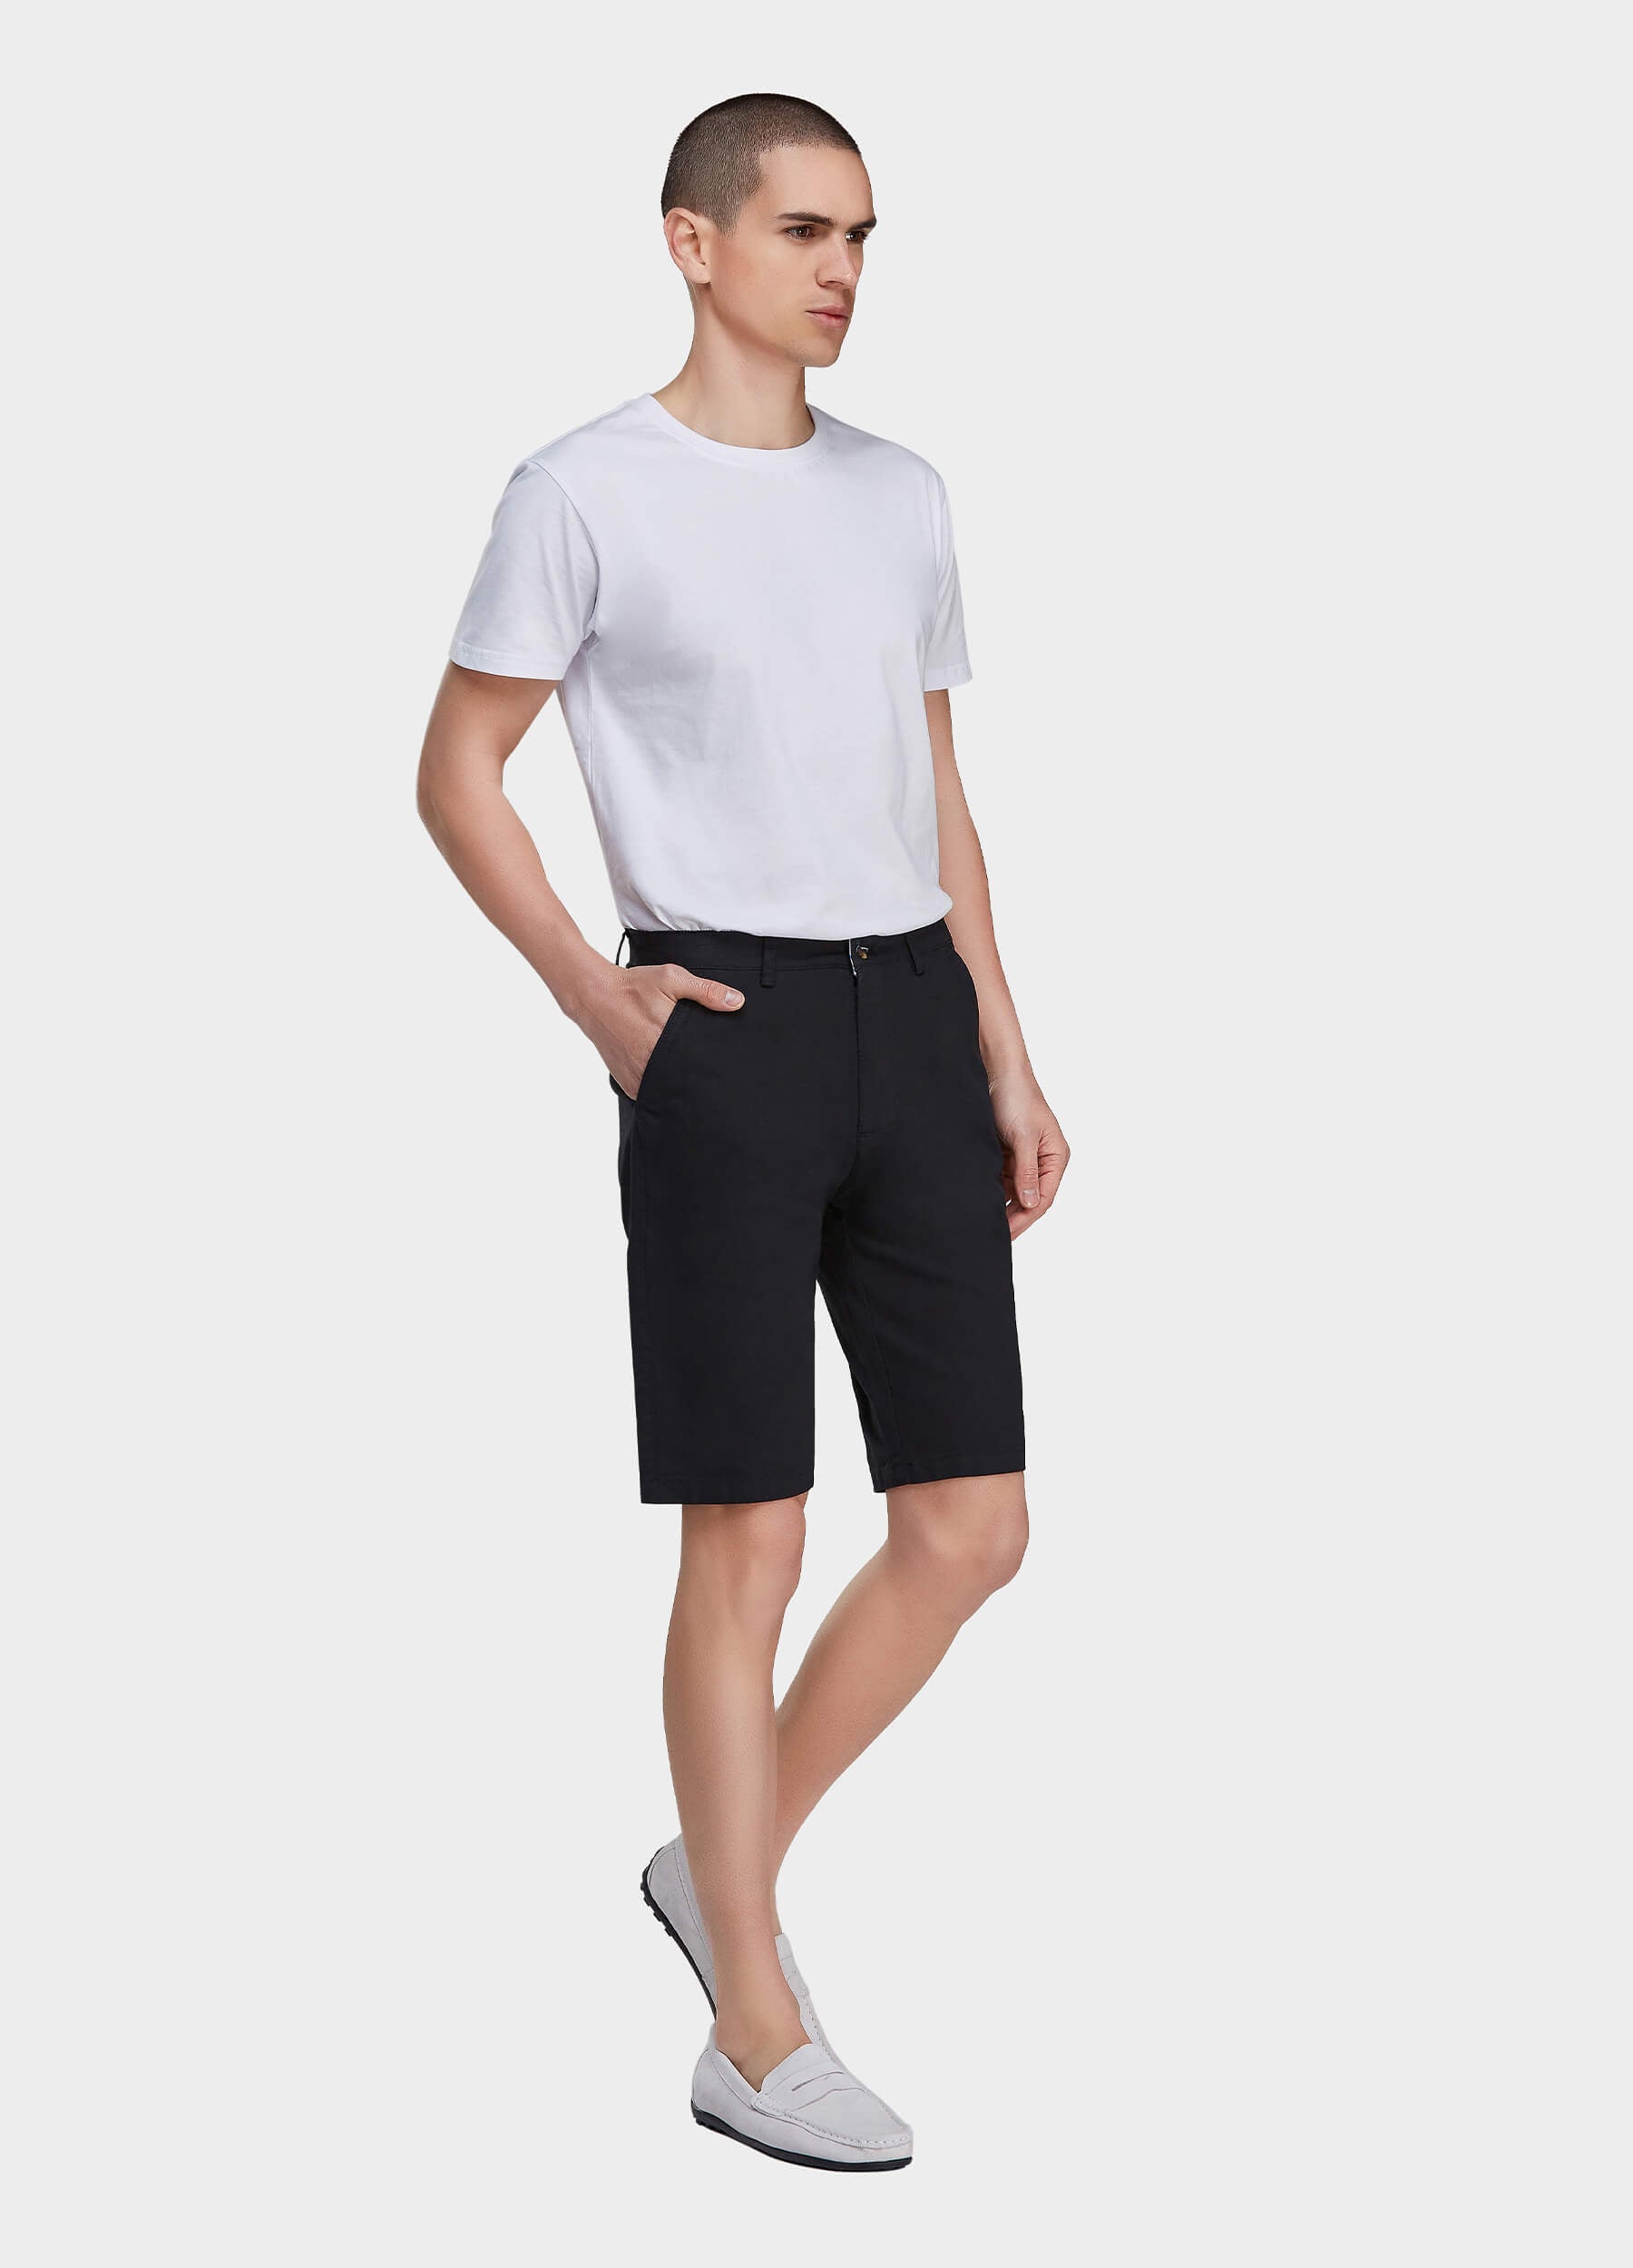 Men's Casual Zipper Fly Button Solid Shorts with Slant Pocket-Black side view